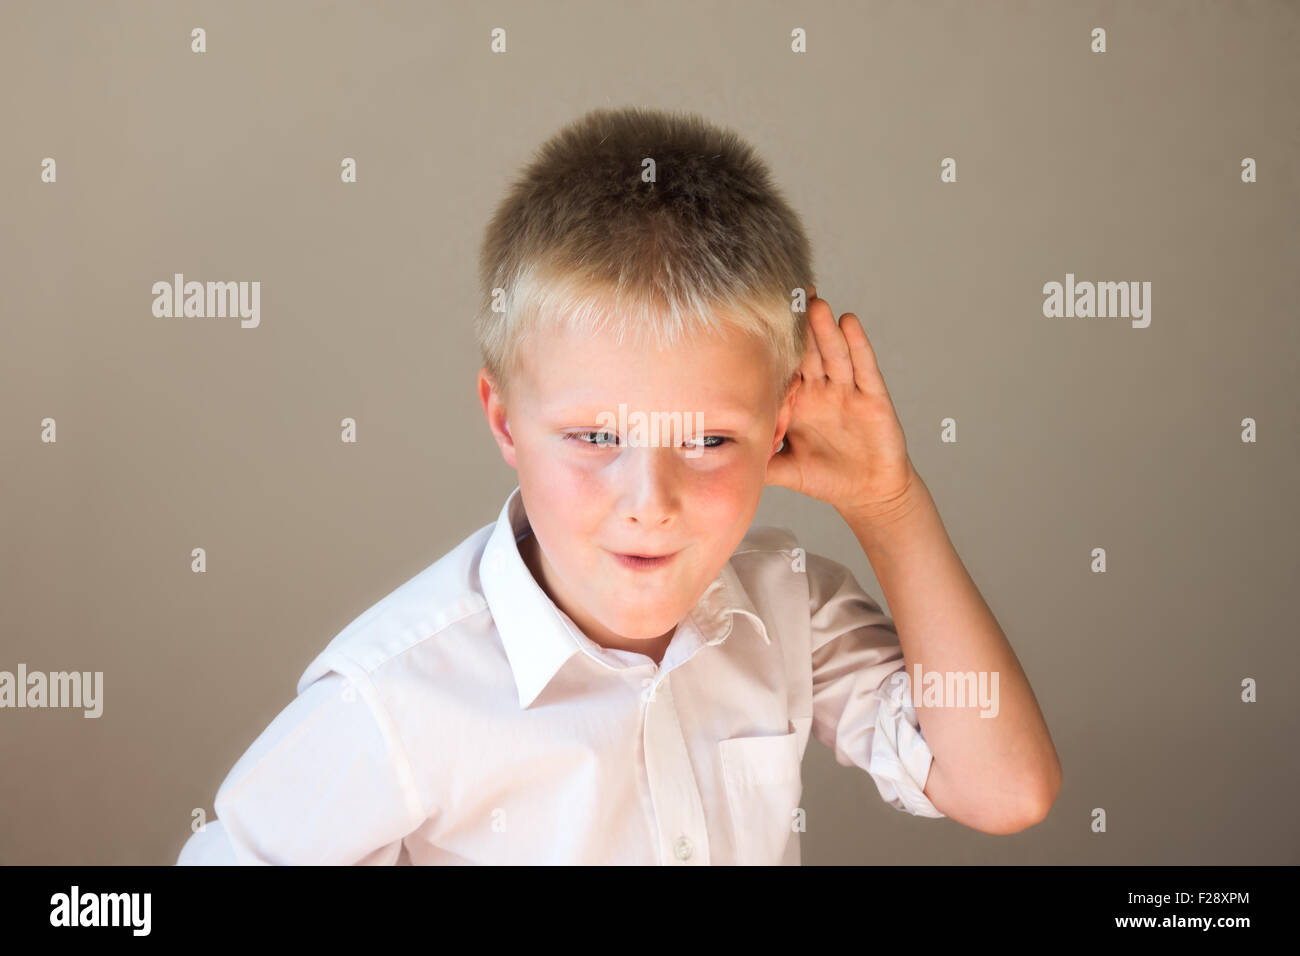 Funny child listening overhearing something with hand to ear concept Stock Photo